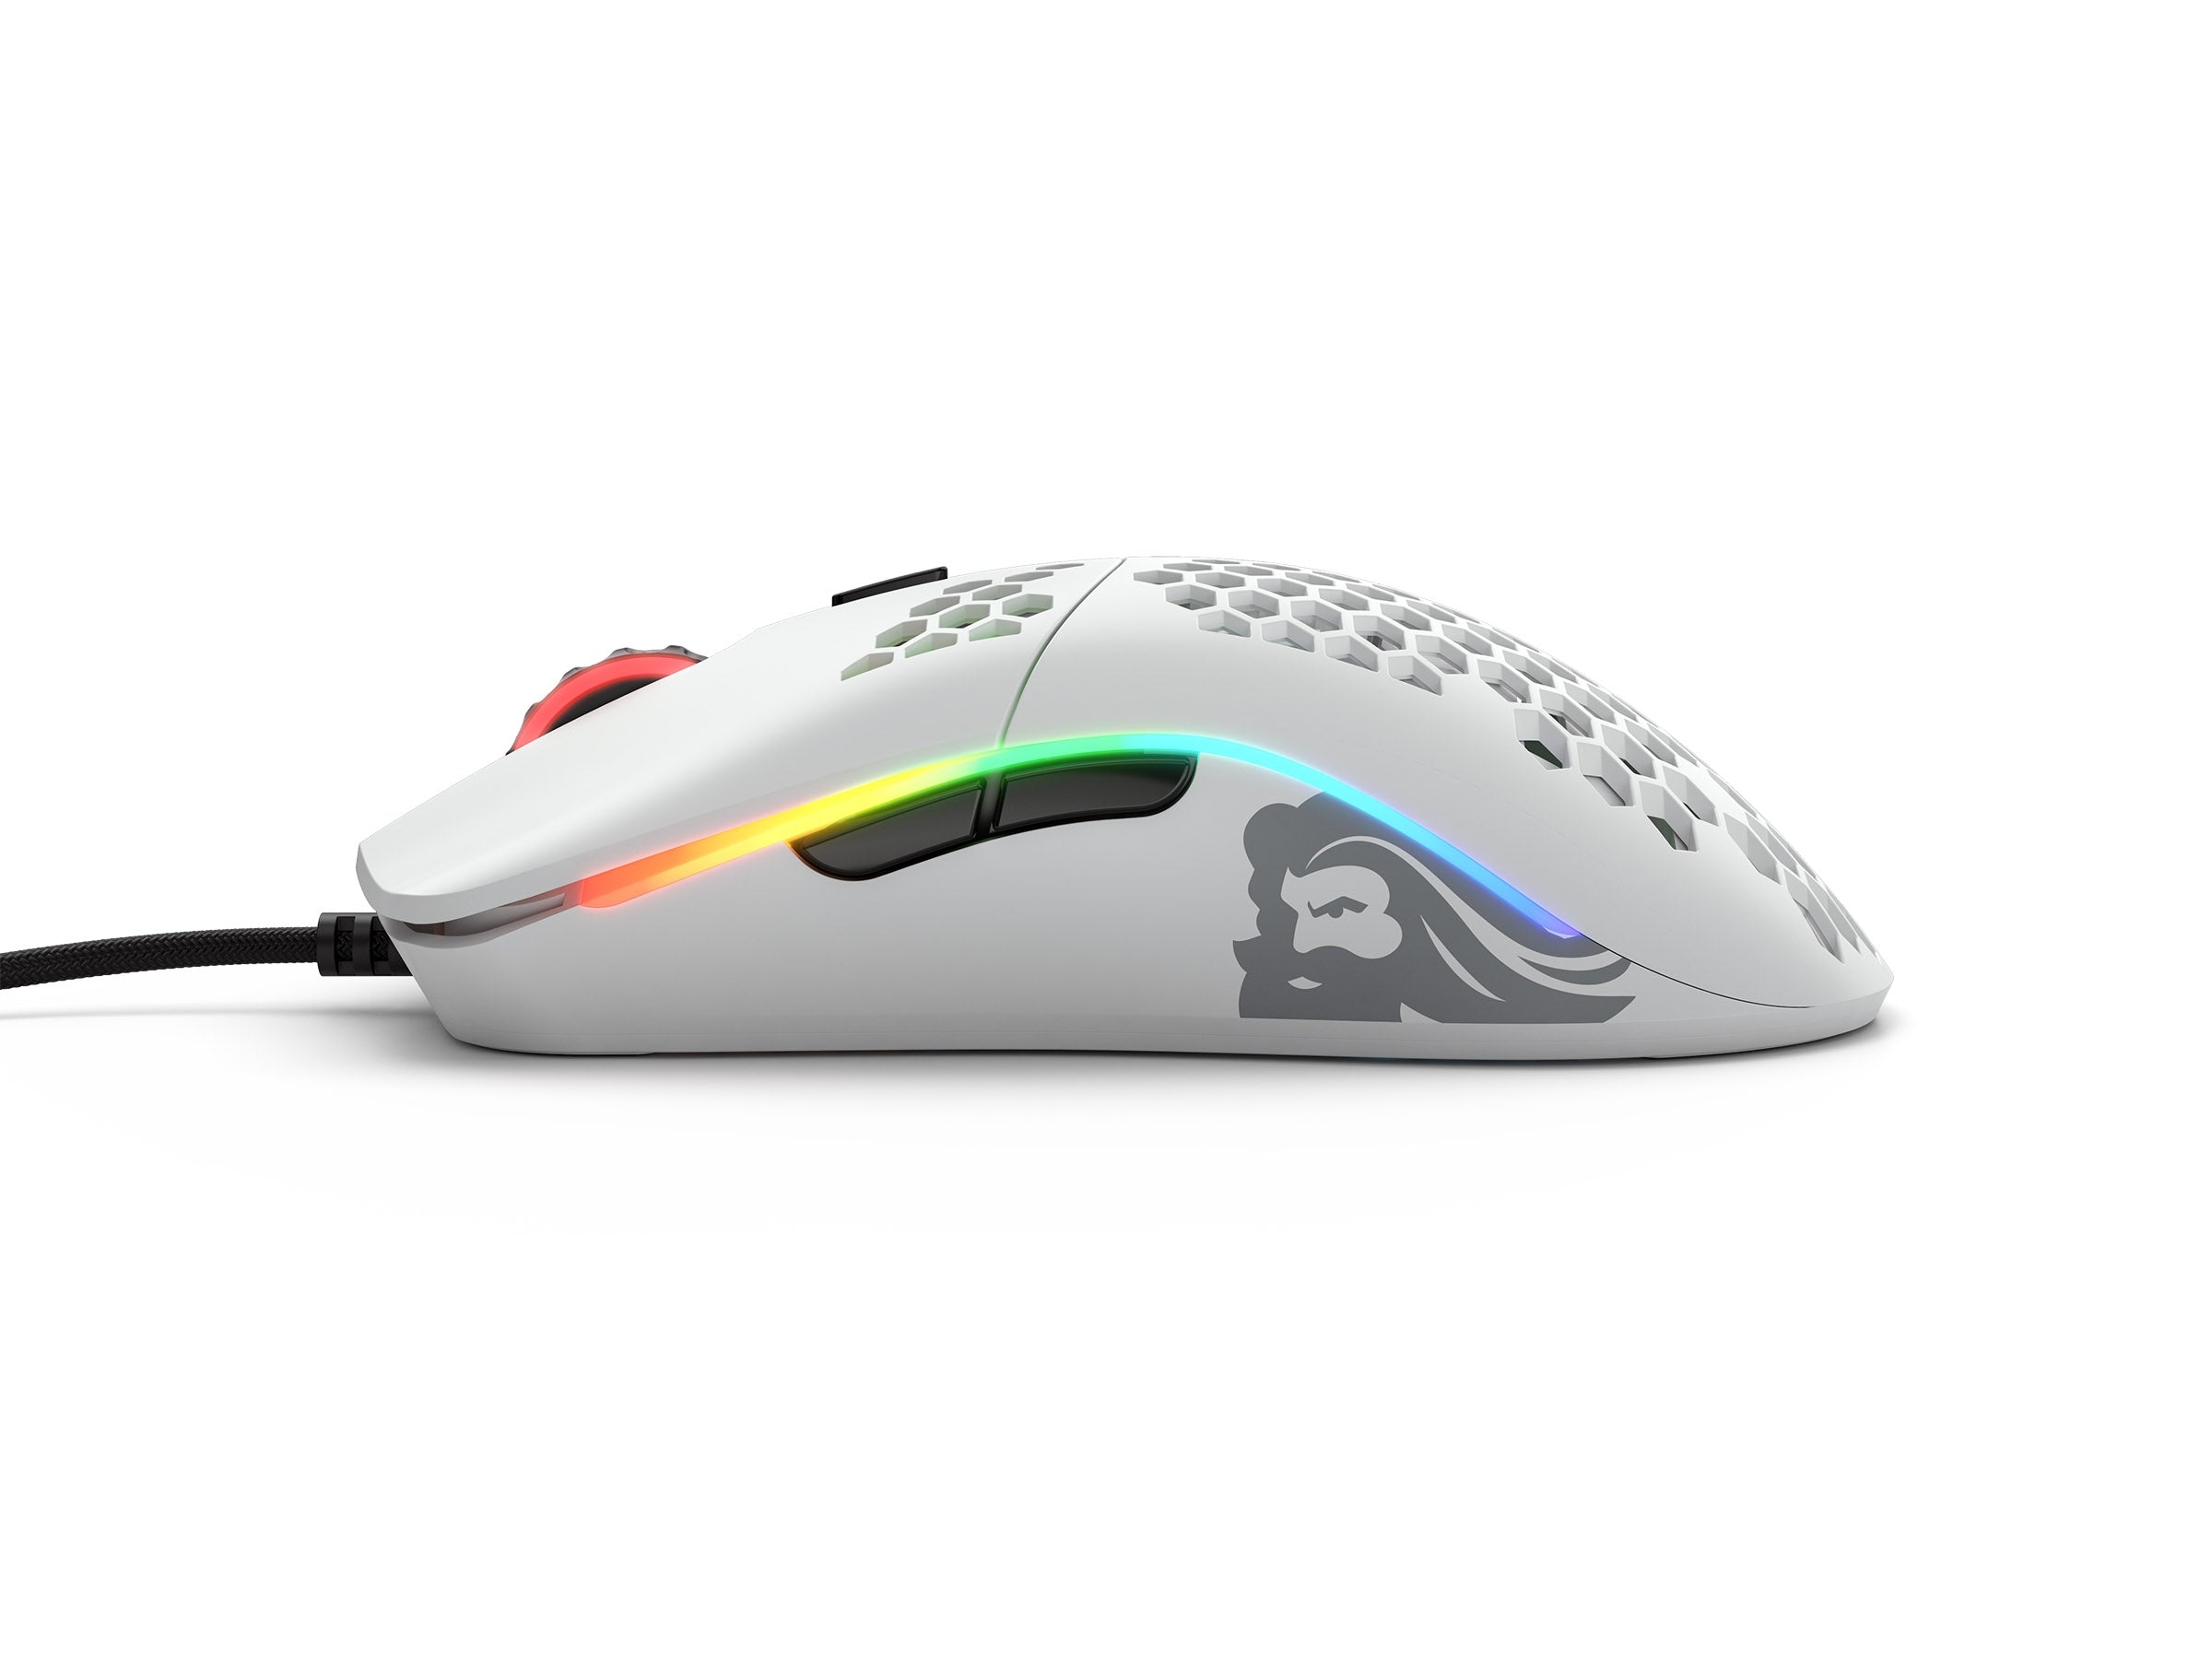 Glorious PC Model O Minus Matte White Lightweight Gaming Mouse MKRL7MAEG5 |27488|